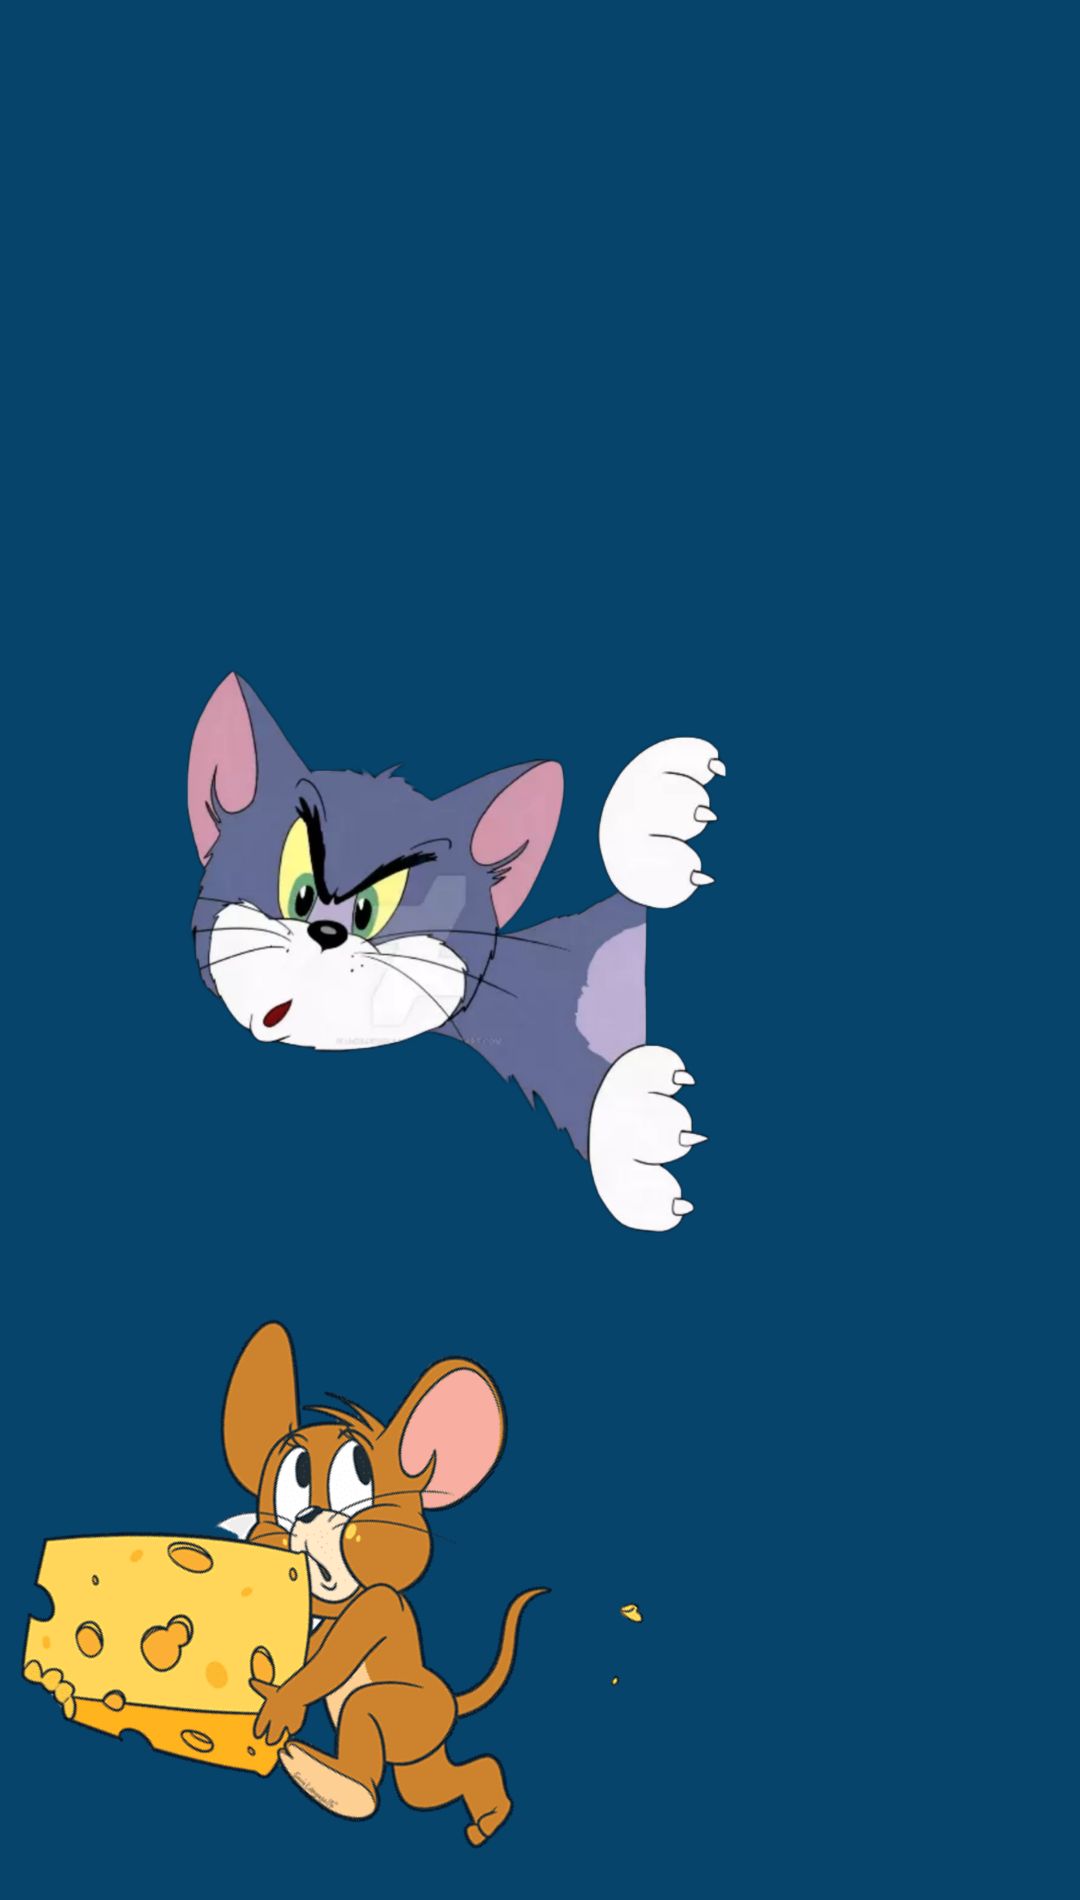 Tom-And-Jerry-iPhone-Wallpaper.jpg